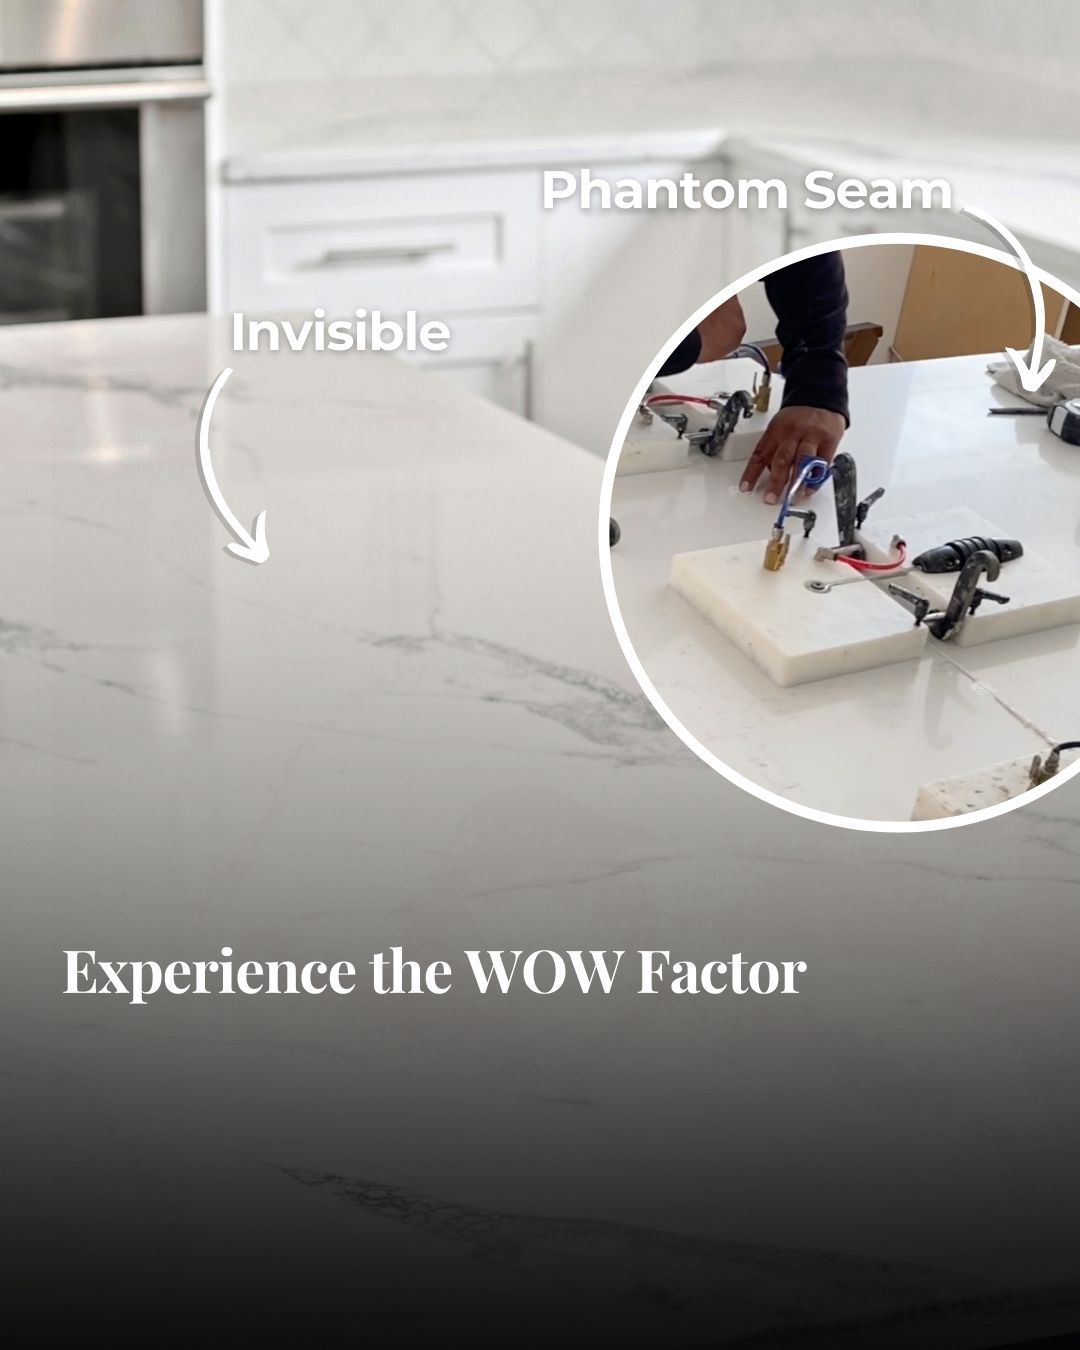 https://www.boracabinetry.com/content/images/2023/07/Unveiling-the-Phantom-Seam-The-Secret-to-a-Seamless-Kitchen-Countertop.jpg